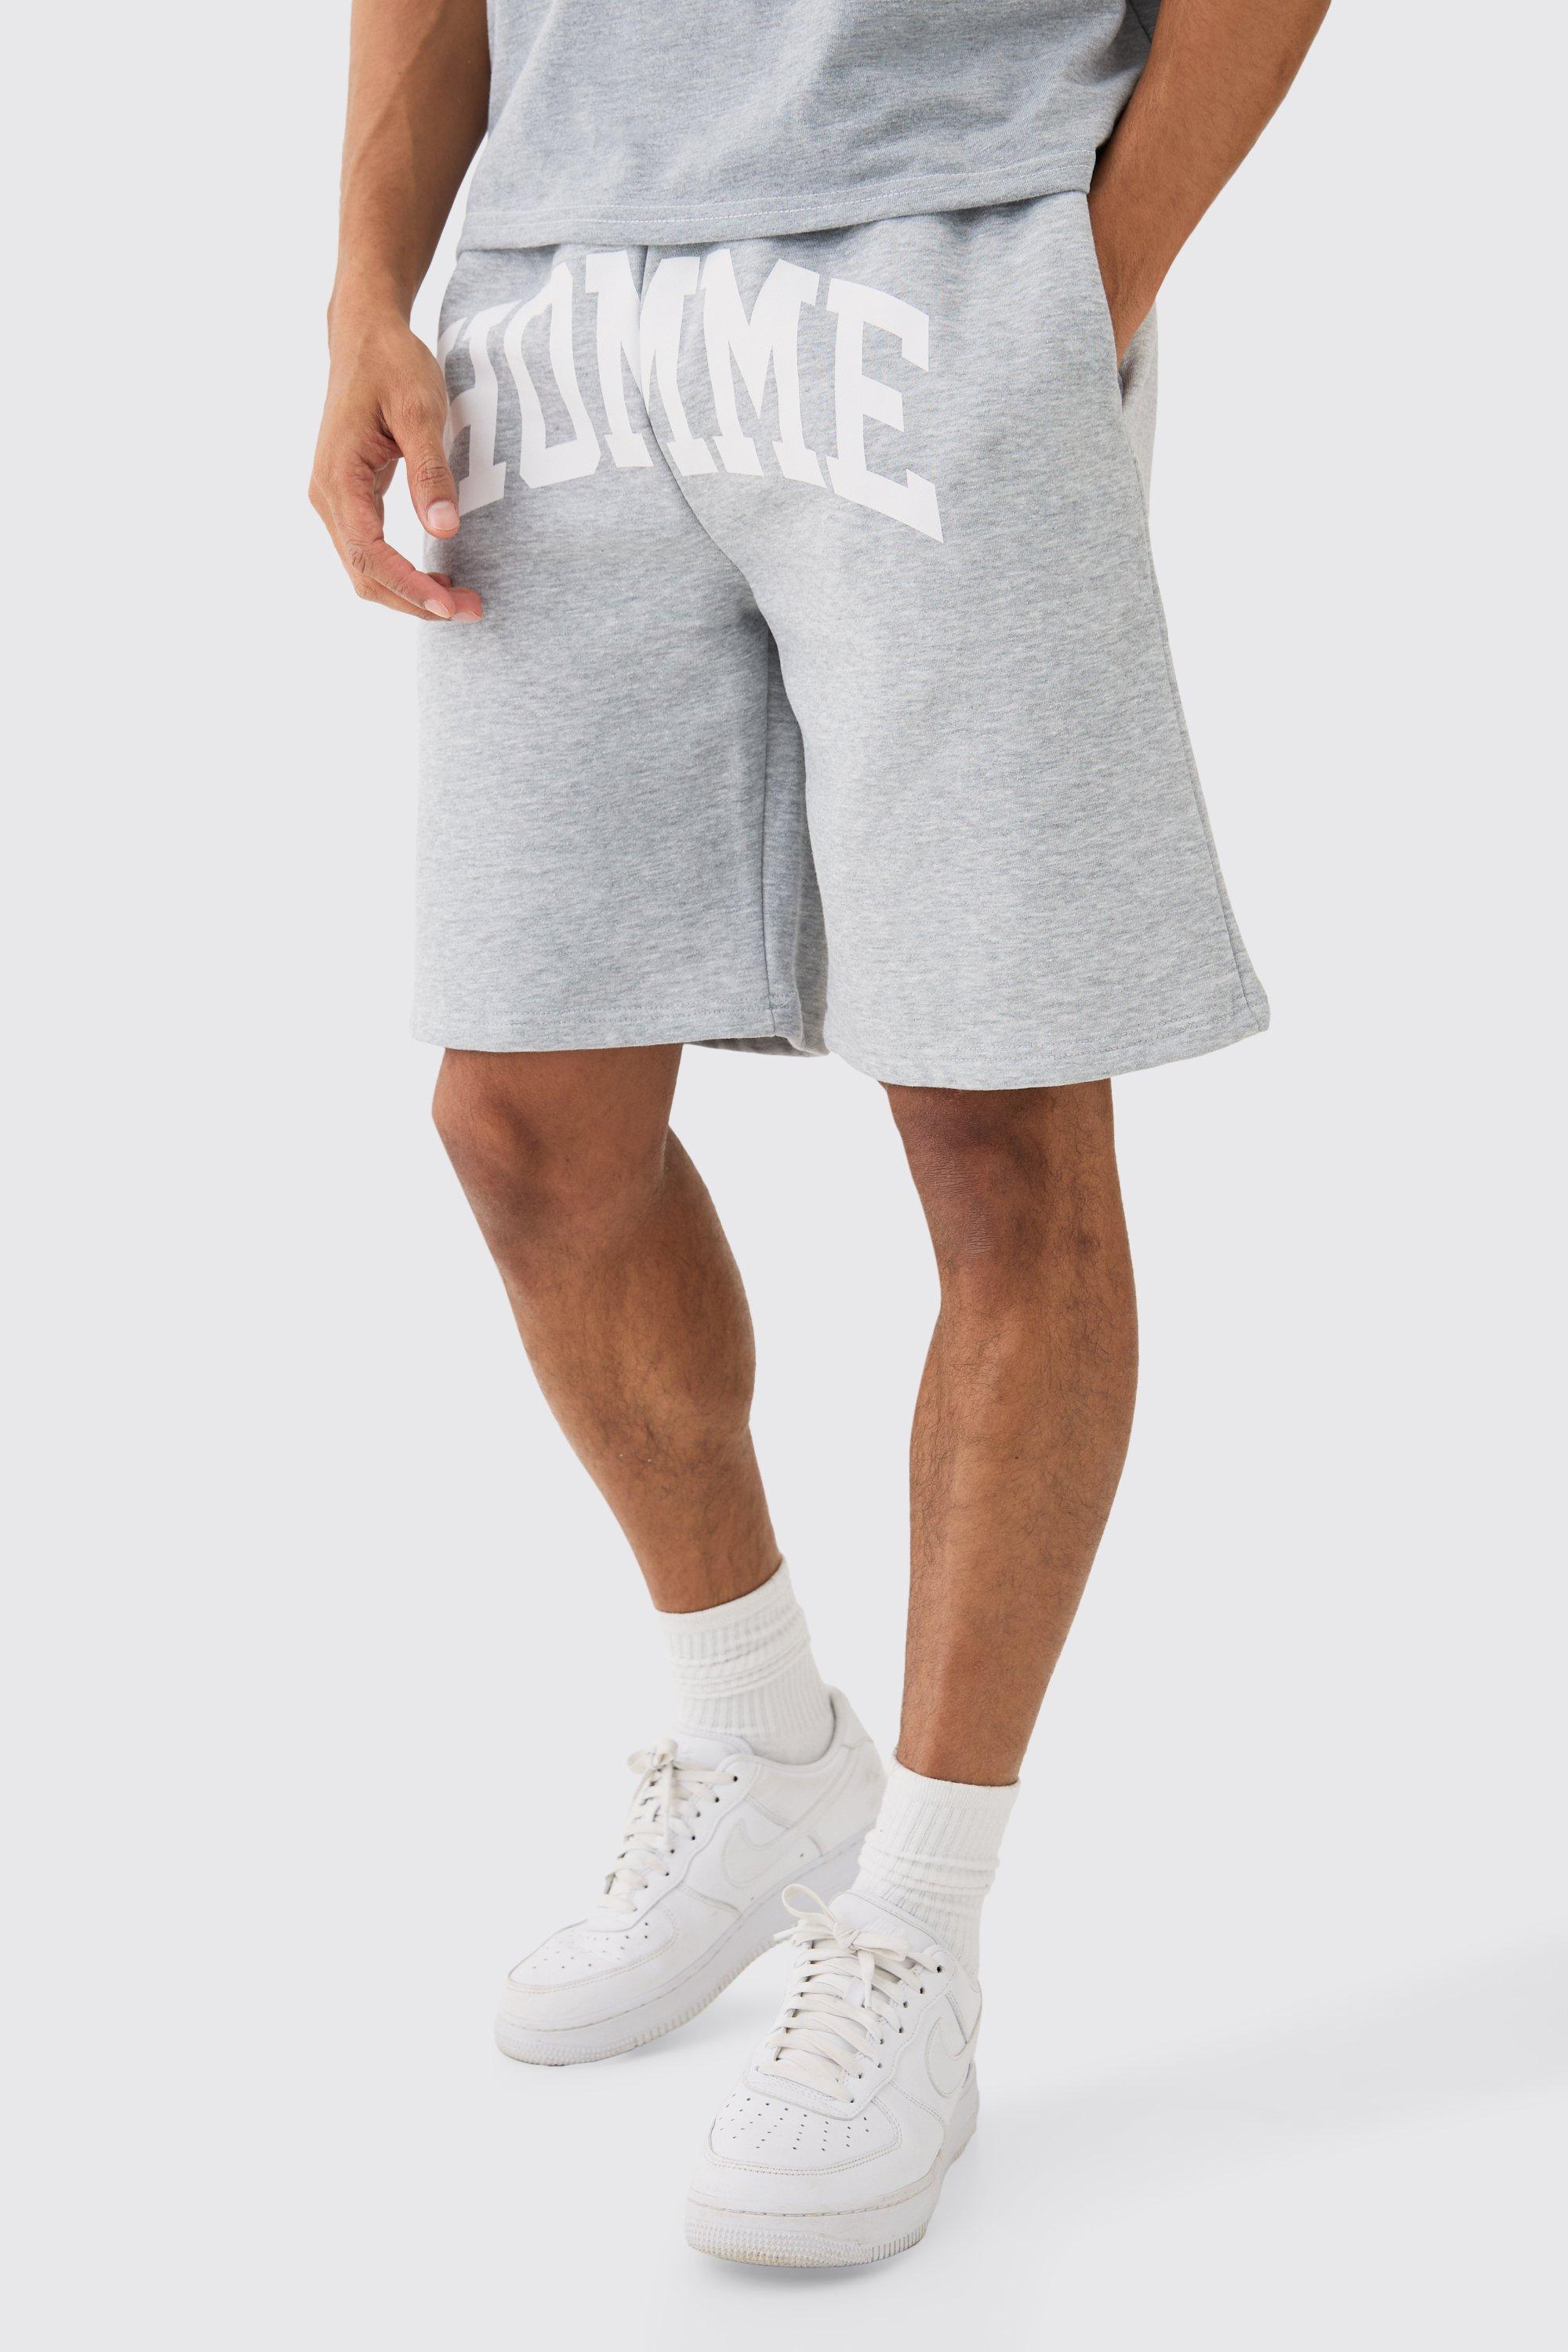 Image of Oversized Homme Crotch Print Short, Grigio